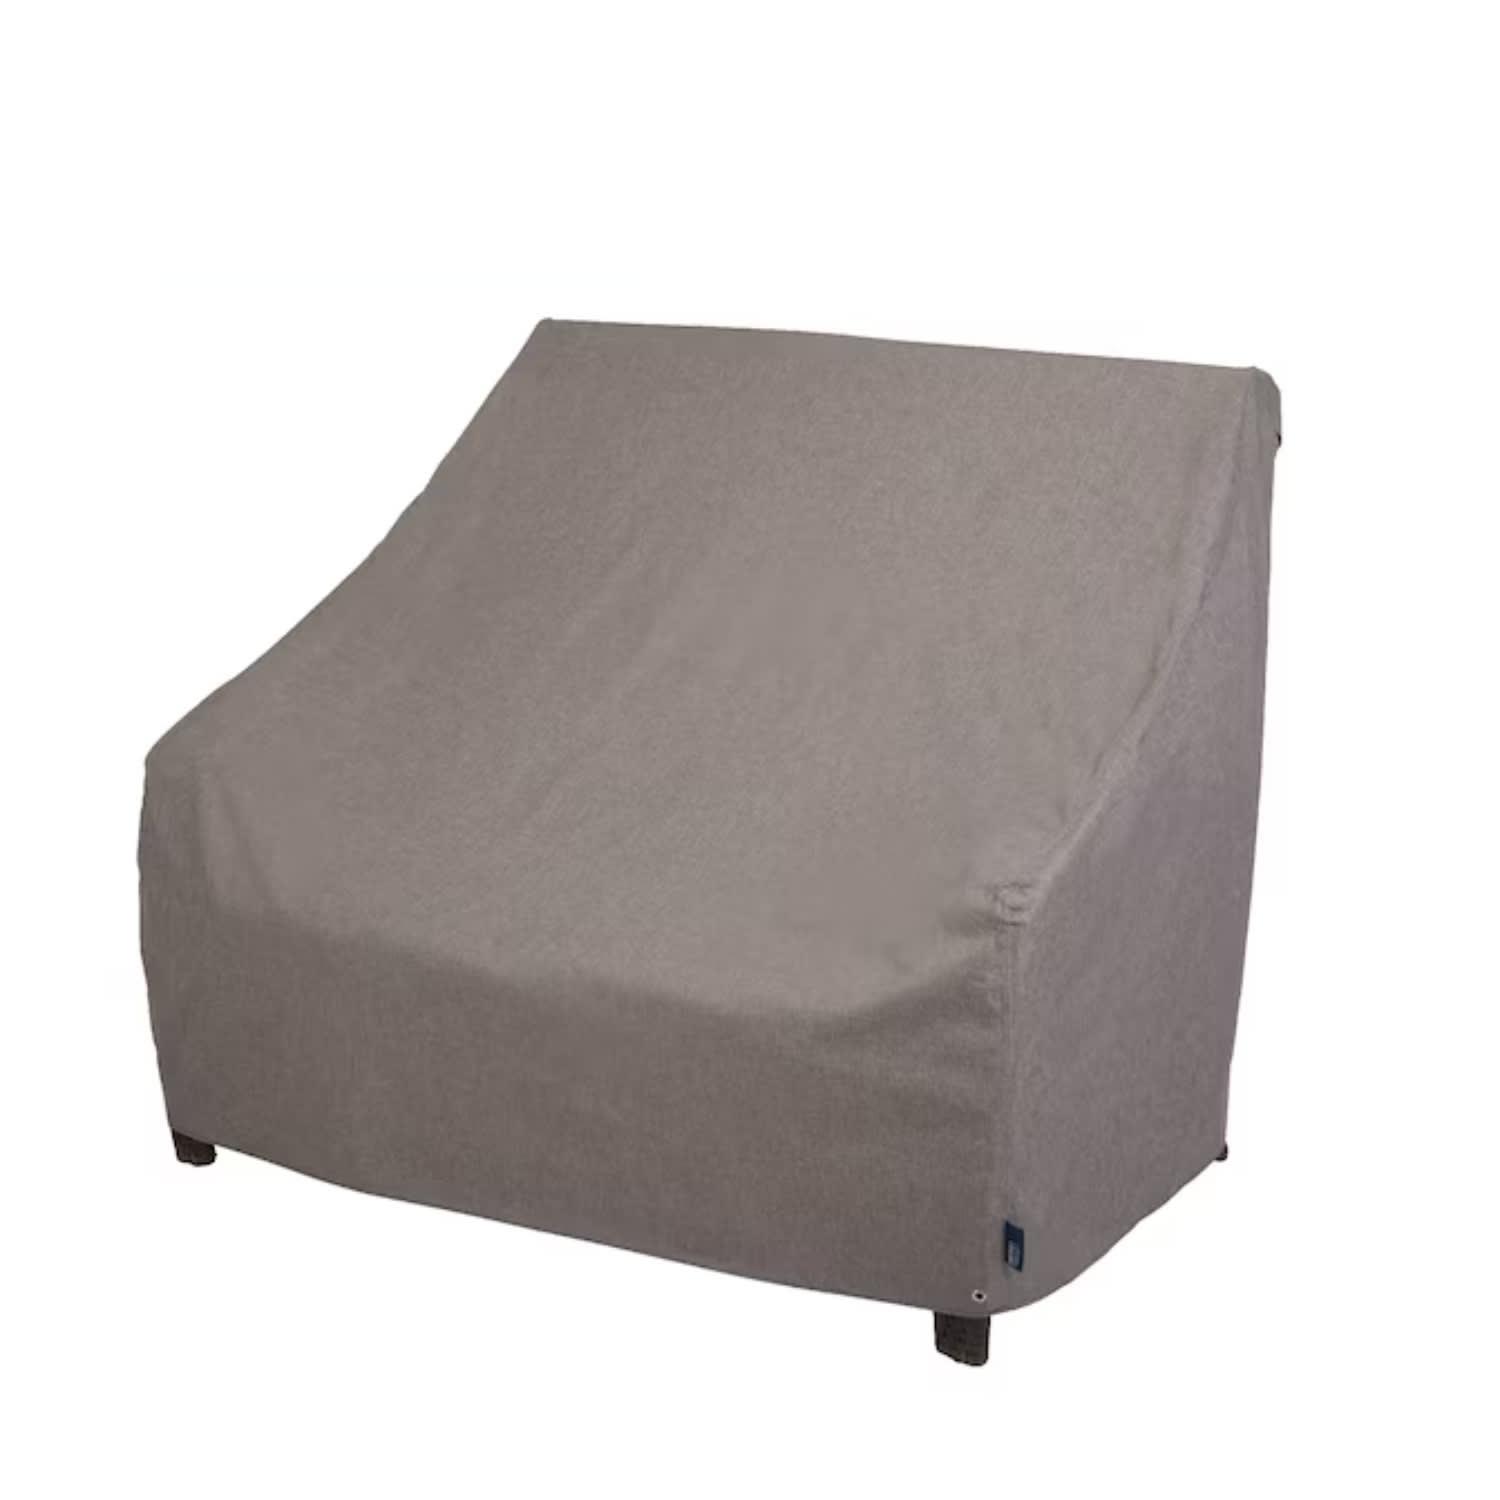 Patio Table & Chair Set Cover Durable & Water Resistant Outdoor Furnit —  KHOMO GEAR